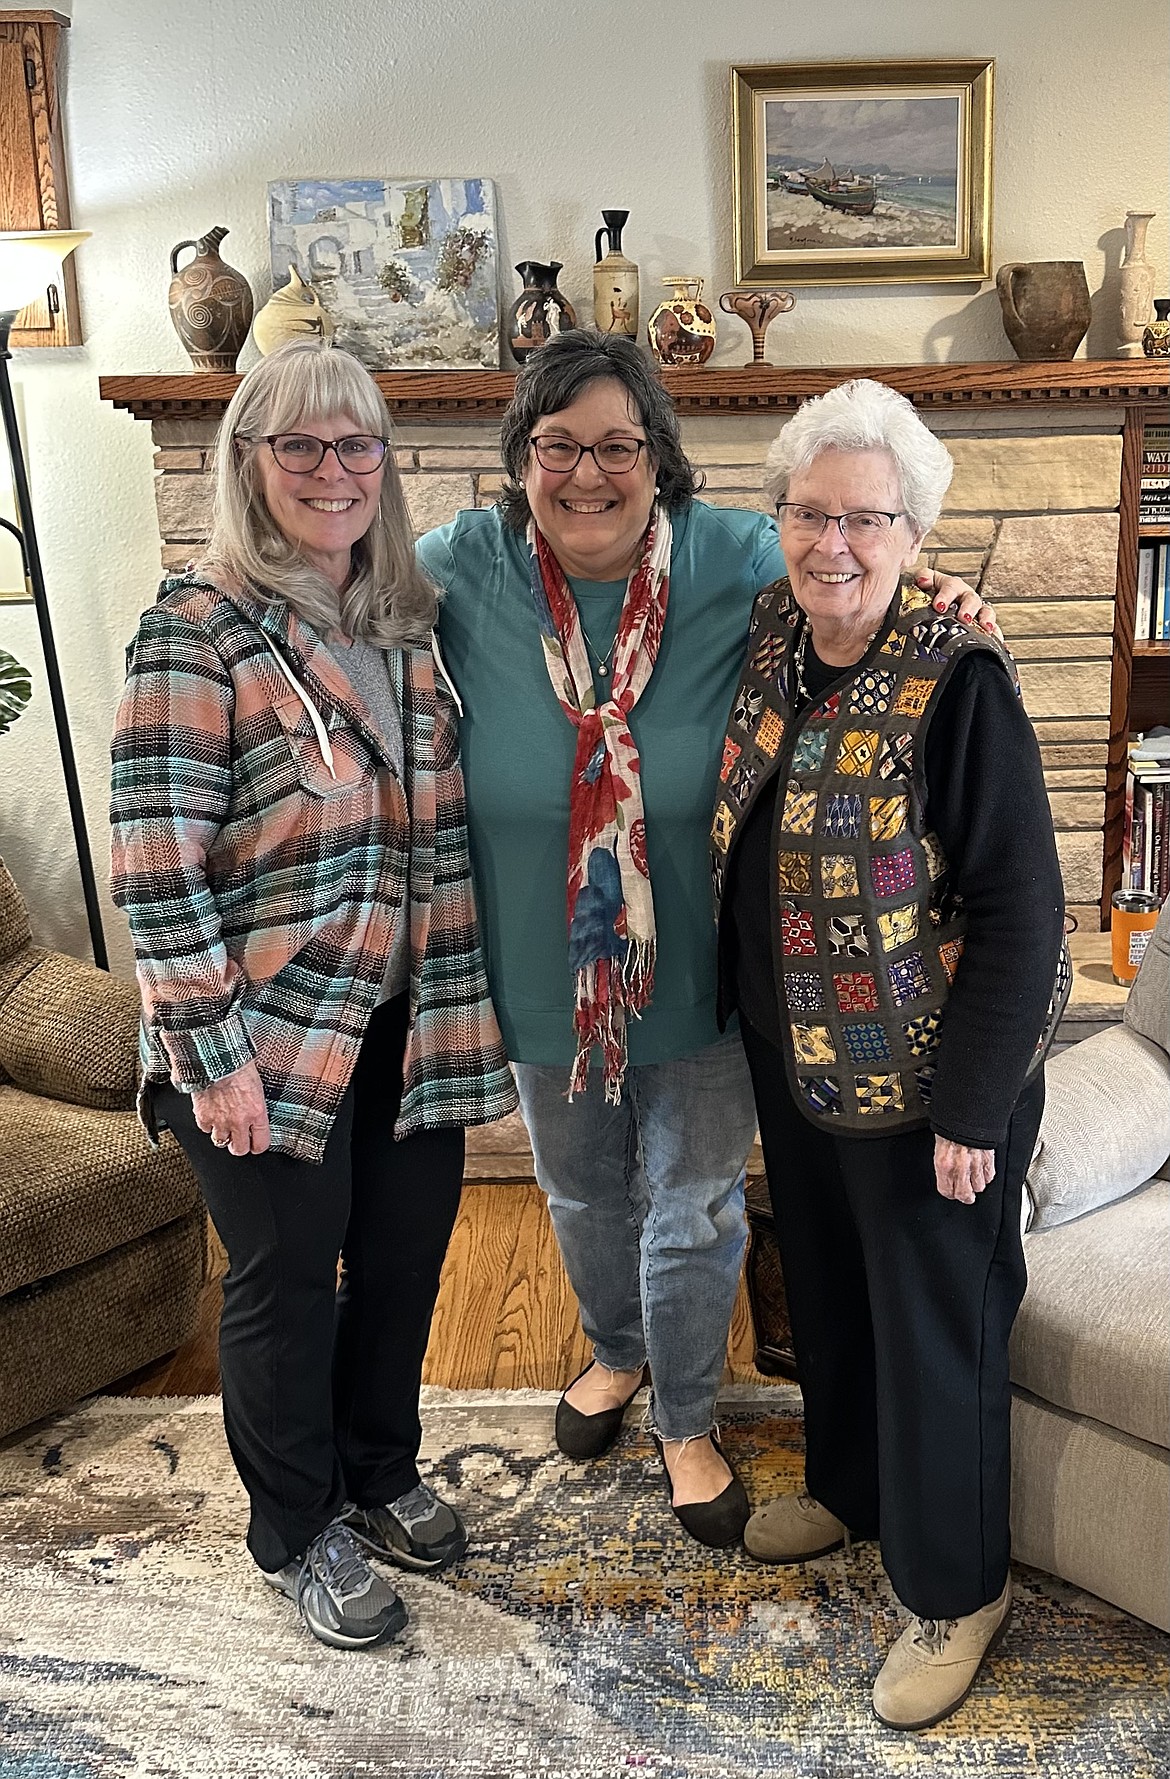 From left, Alesa Momerak, Pris Phillips and Ginger Hain pose for a photo celebrating their work with Wee Ones Quilts. Phillips formed the group to donate blankets to the neonatal intensive care unit at Kootenai Health.